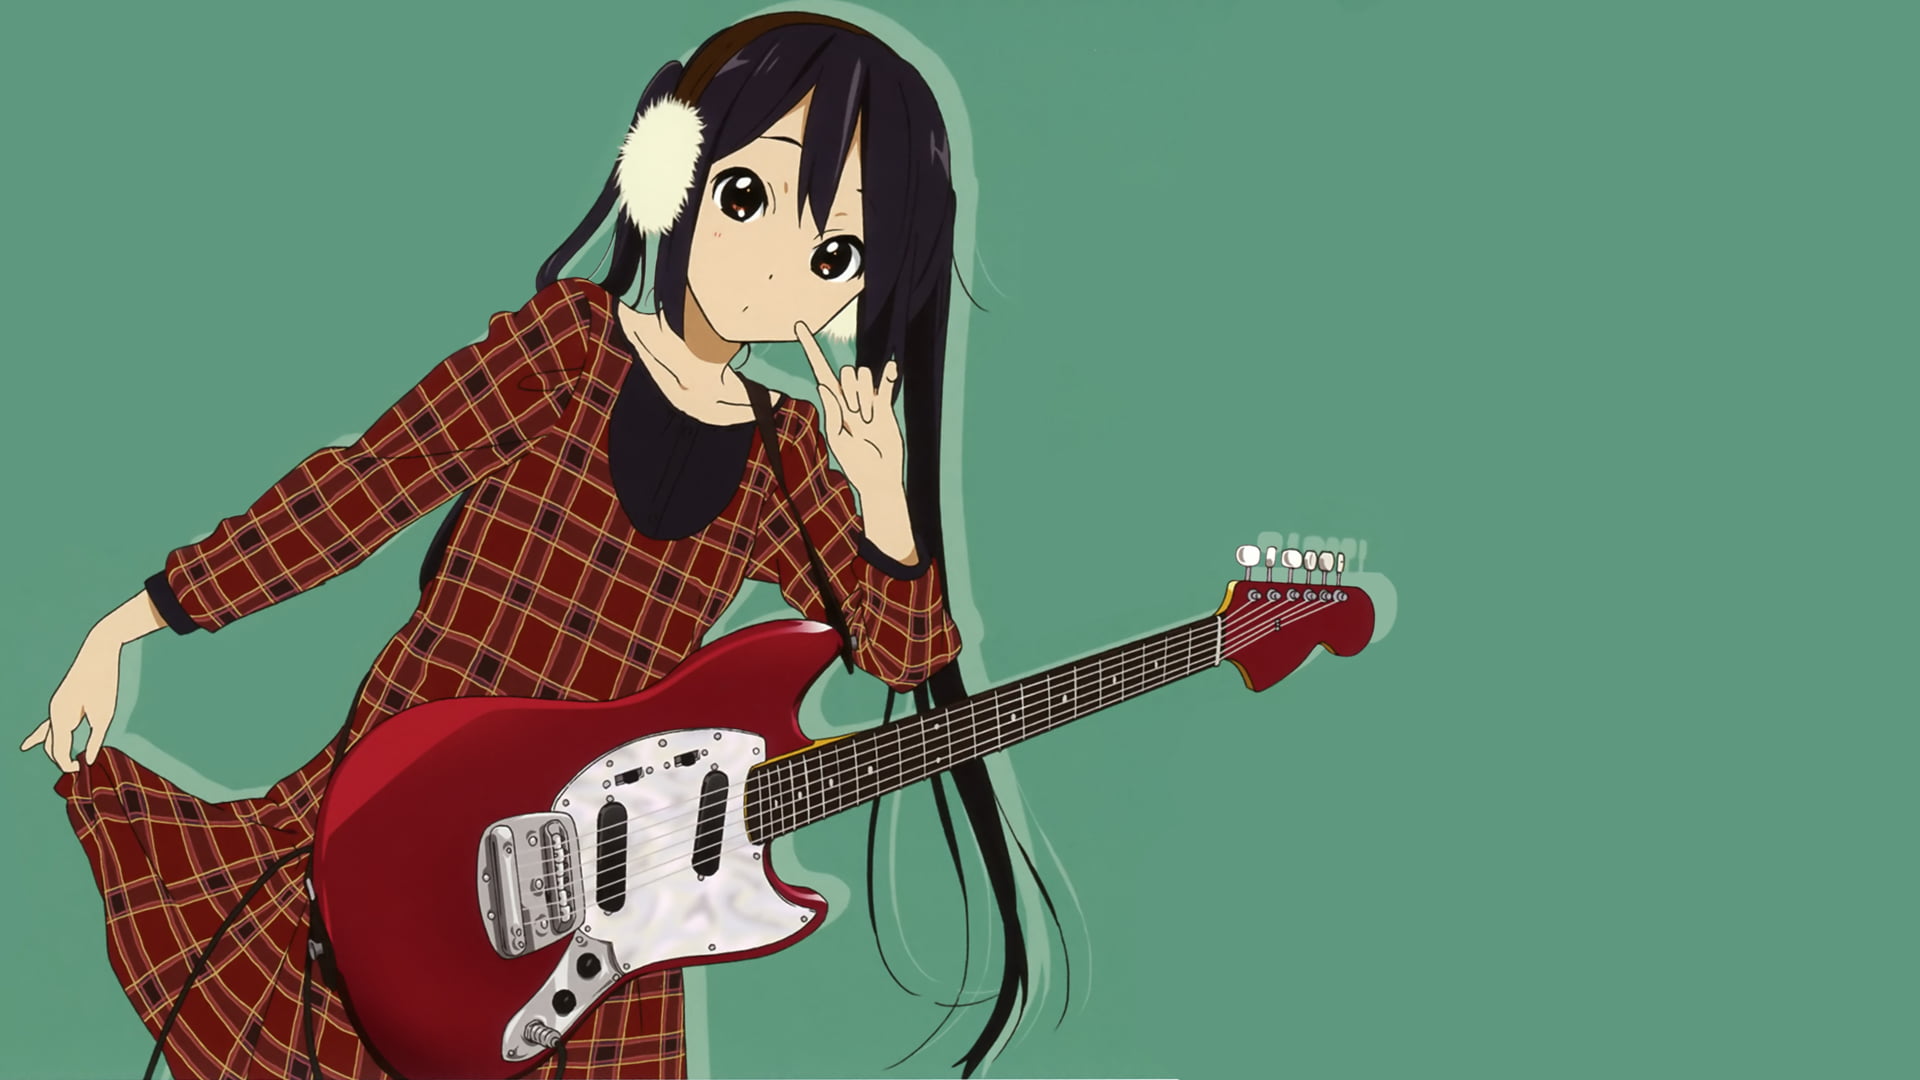 Female anime character with guitar illustration HD wallpaper ...